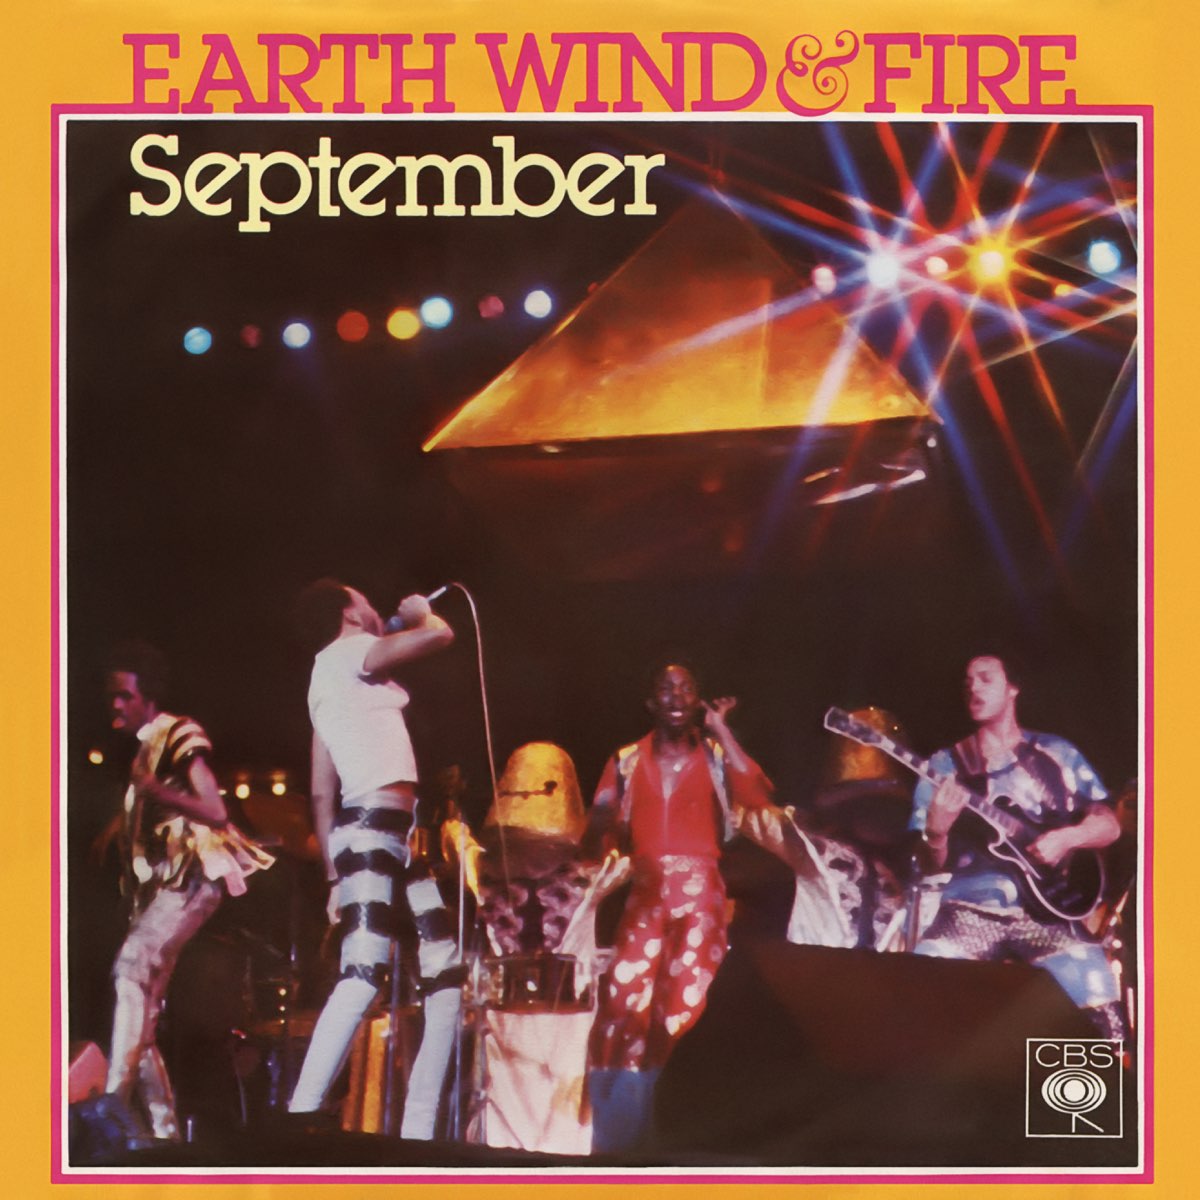 ‎September by Earth, Wind & Fire on Apple Music